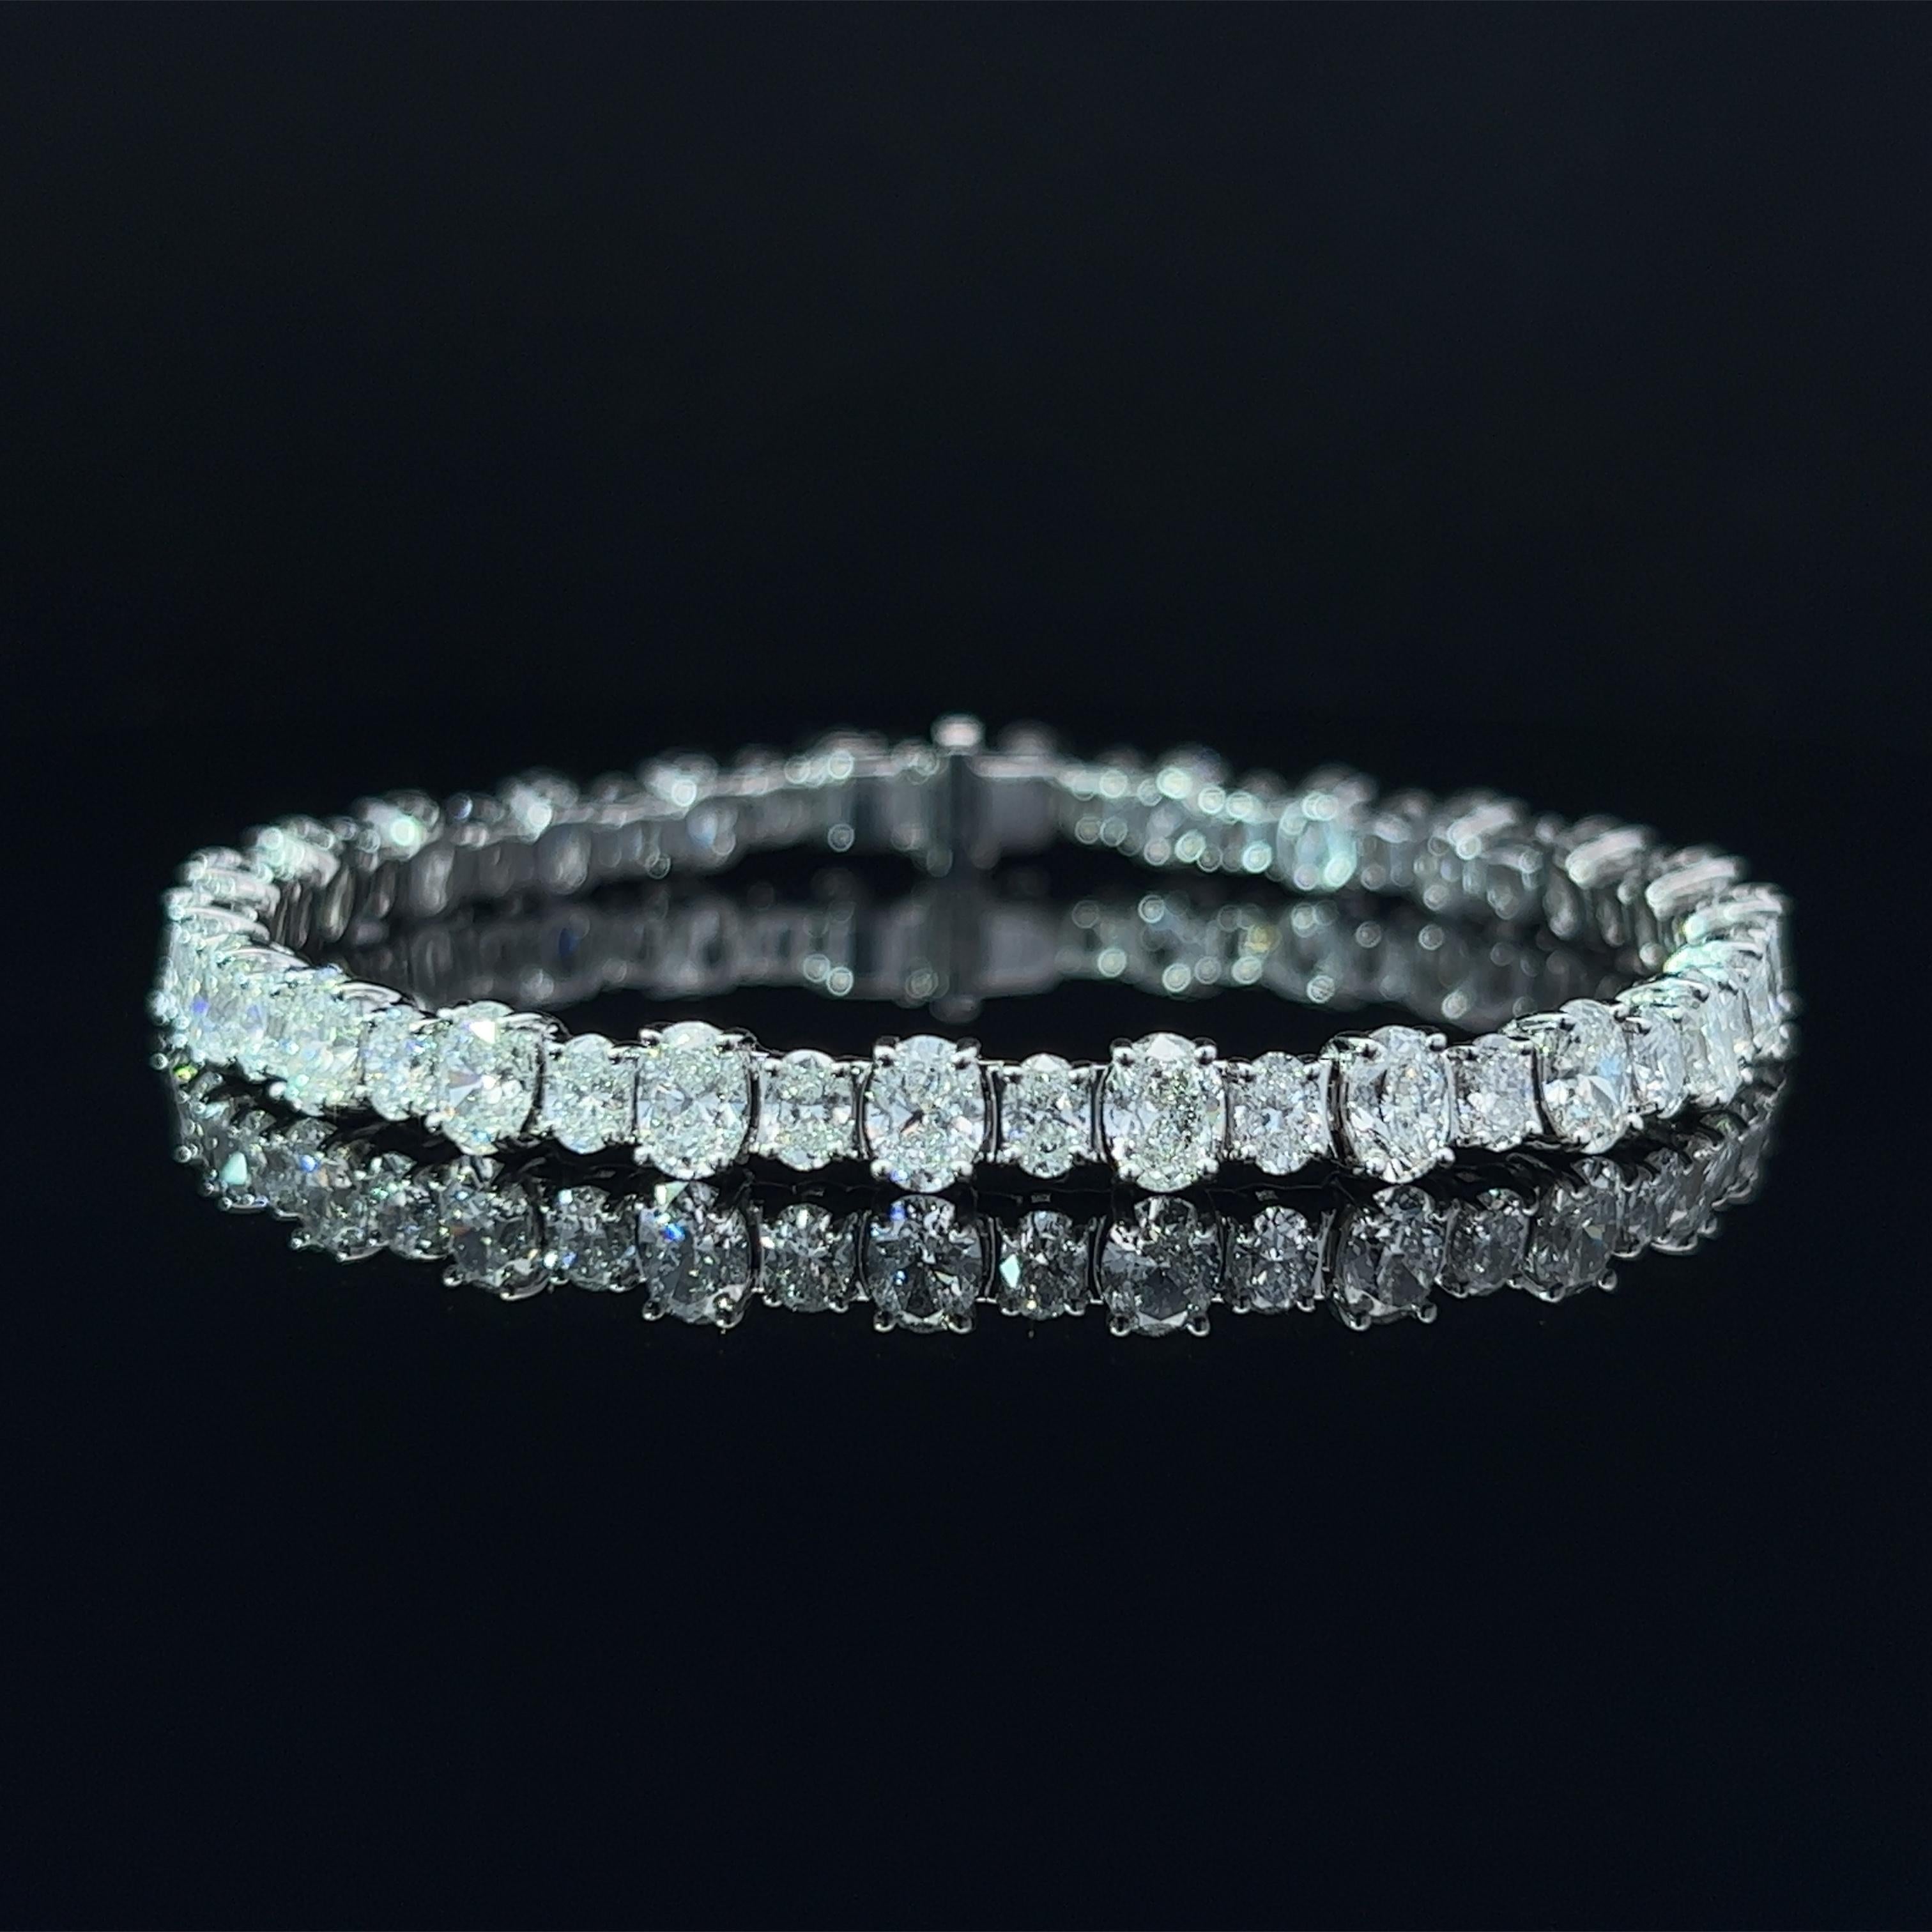 Diamond Shape: Oval
Total Diamond Weight: 10.64ct
Individual Diamond Weight: .33ct & .15ct
Color/Clarity: FG VVS 
Metal: 18K White Gold 
Metal Weight: 16.36g

Key Features:

Oval-Cut Diamonds: The centerpiece of this bracelet consists of two